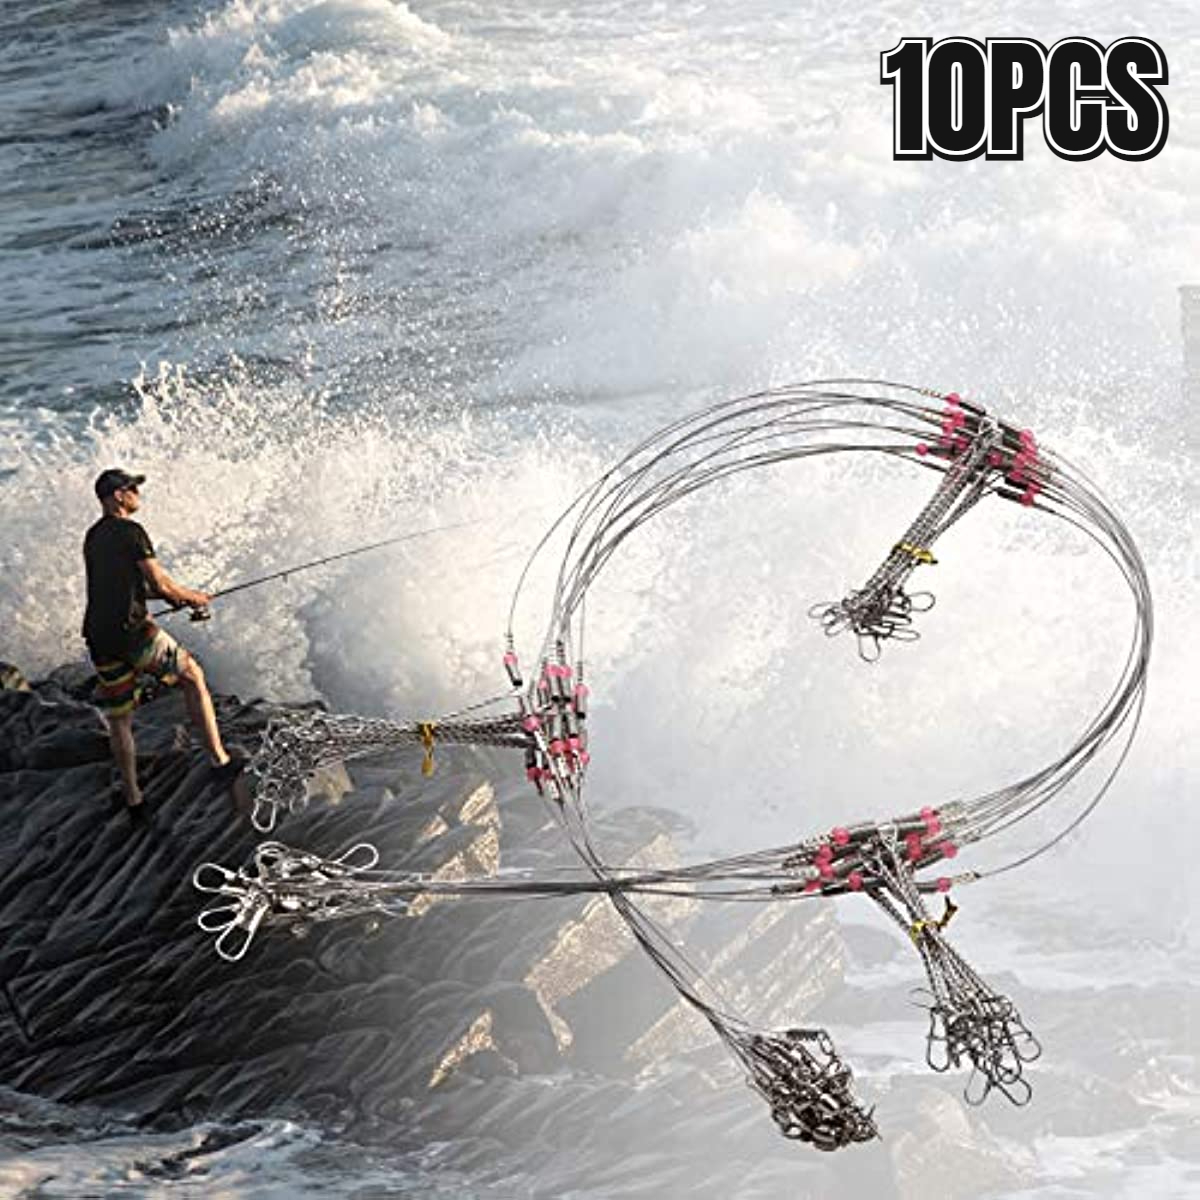 24Pcs/Bags Fishing Leaders Saltwater Fishing Rigs with Swivels